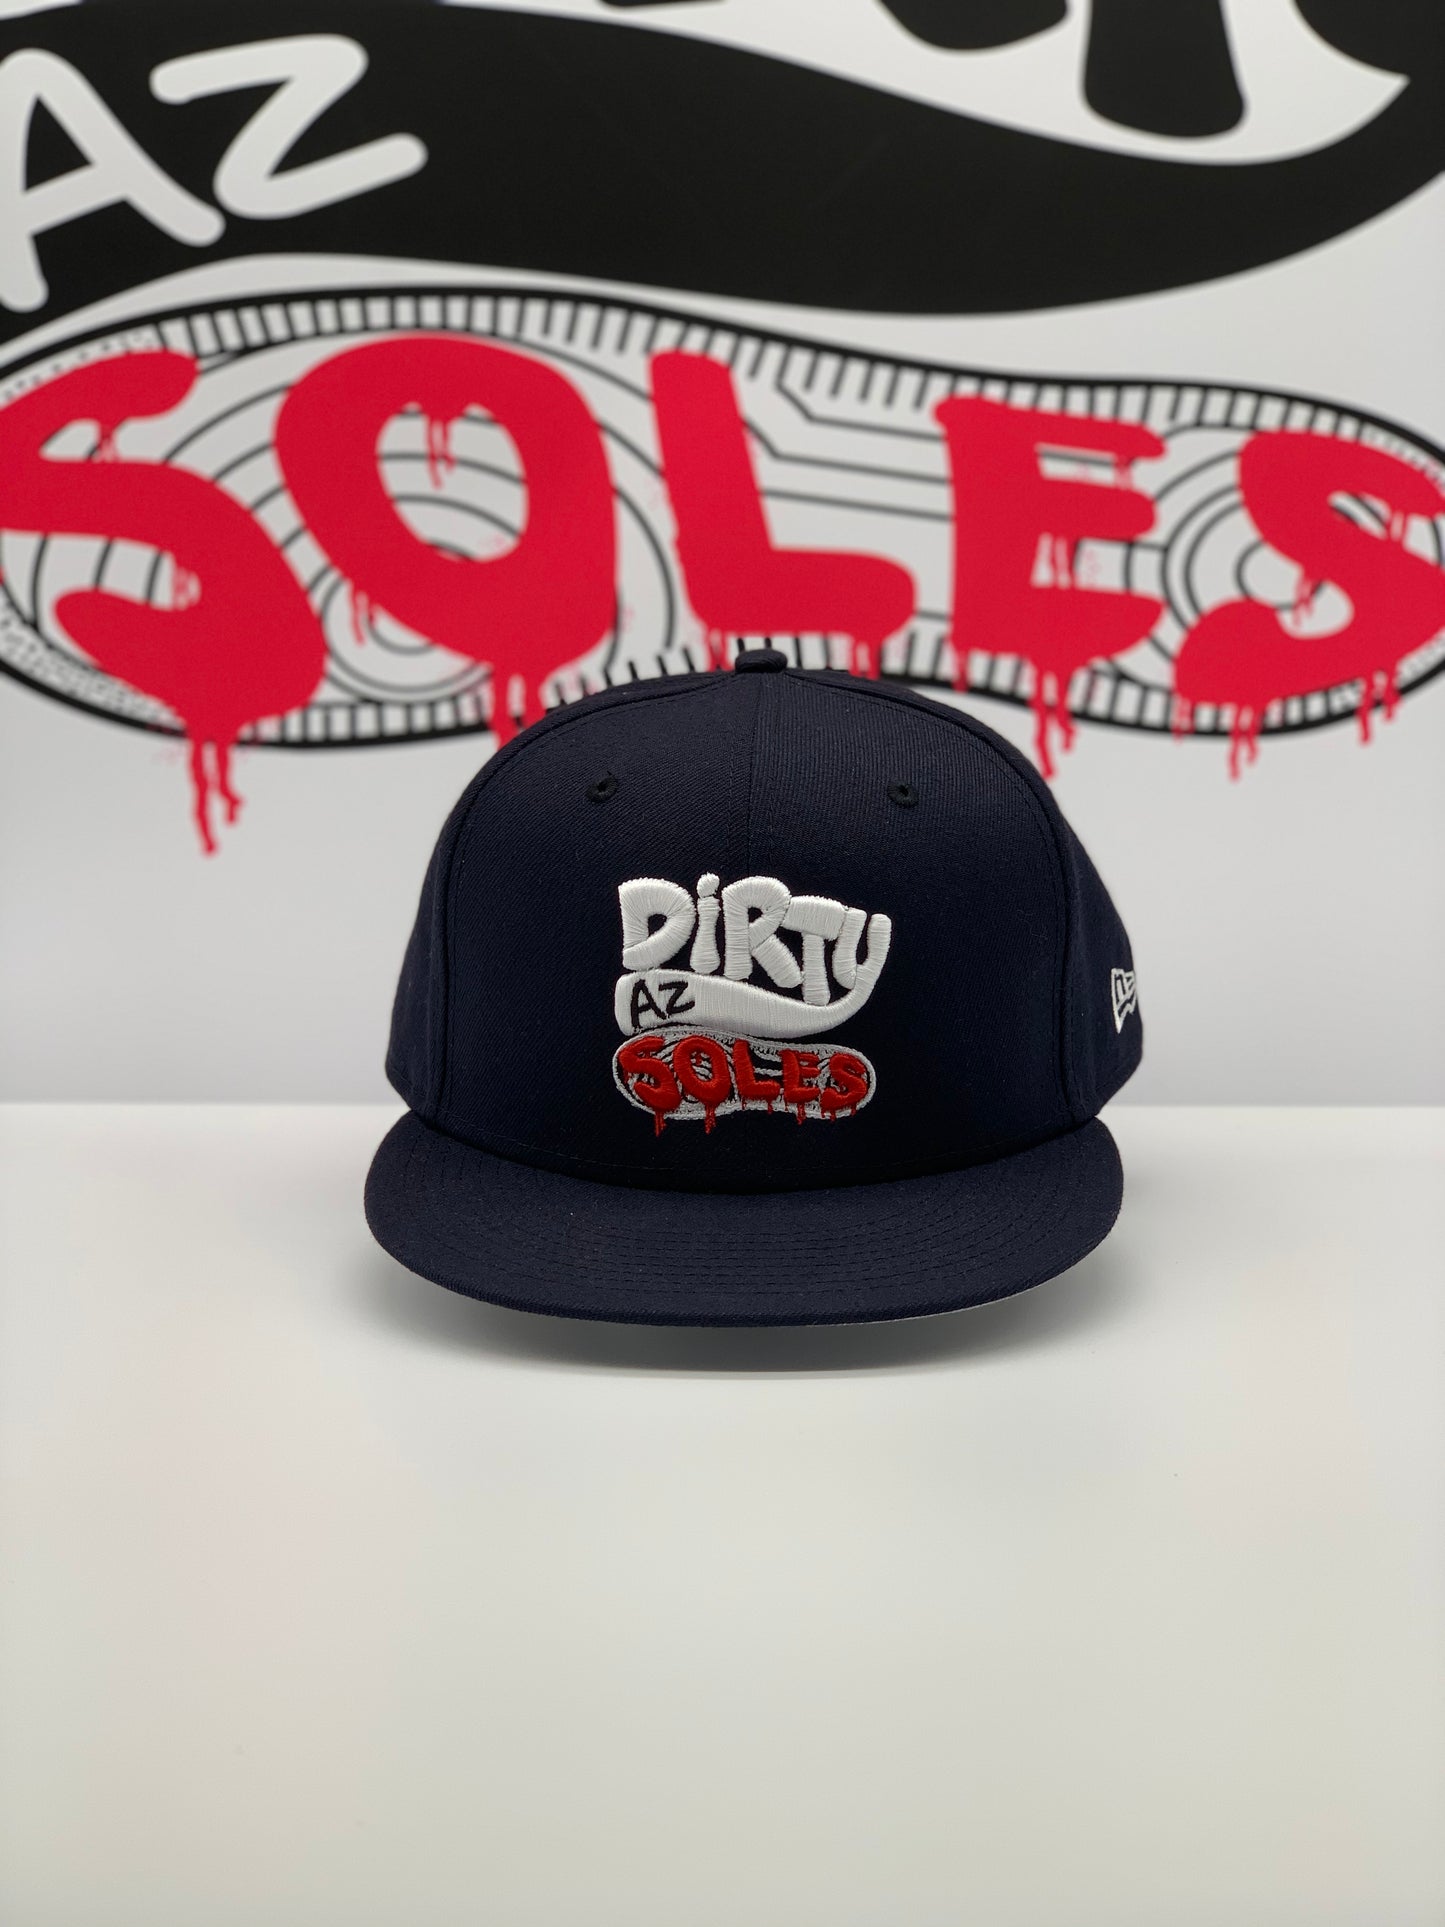 Men's Dirty AZ Soles New Era Navy Blue 59FIFTY Fitted Hat